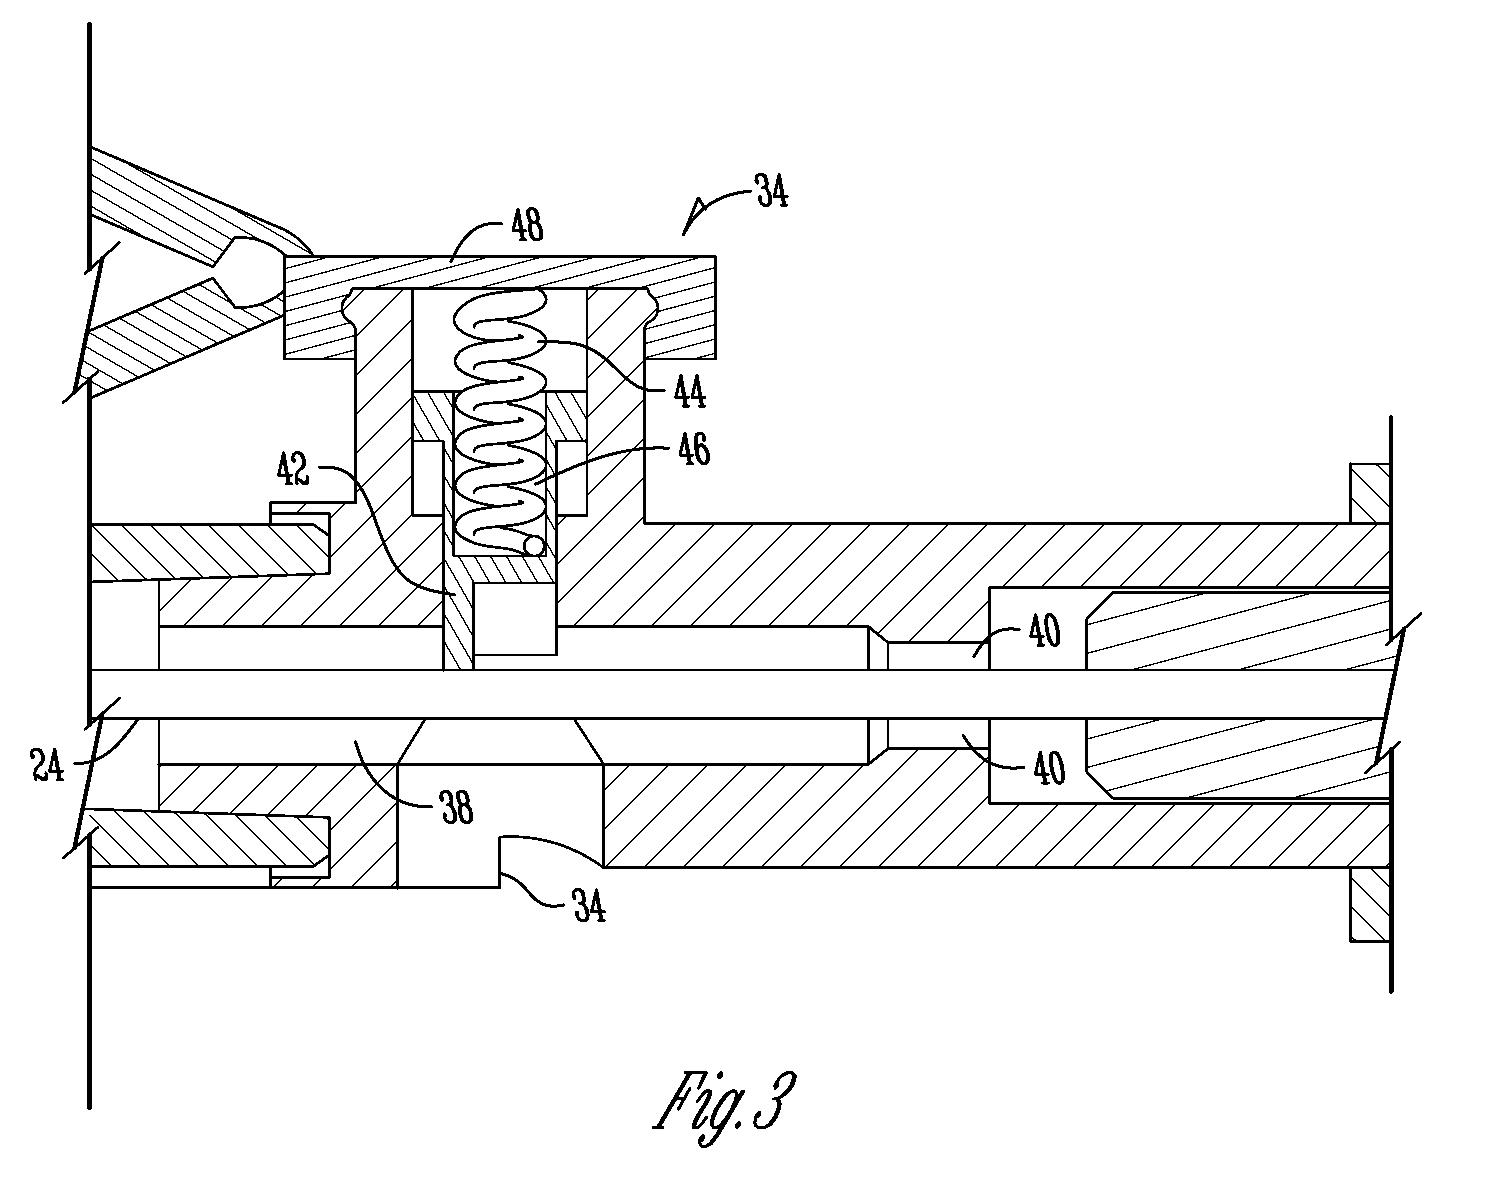 Safety device to cover the needle tip of intravenous catheter apparatus